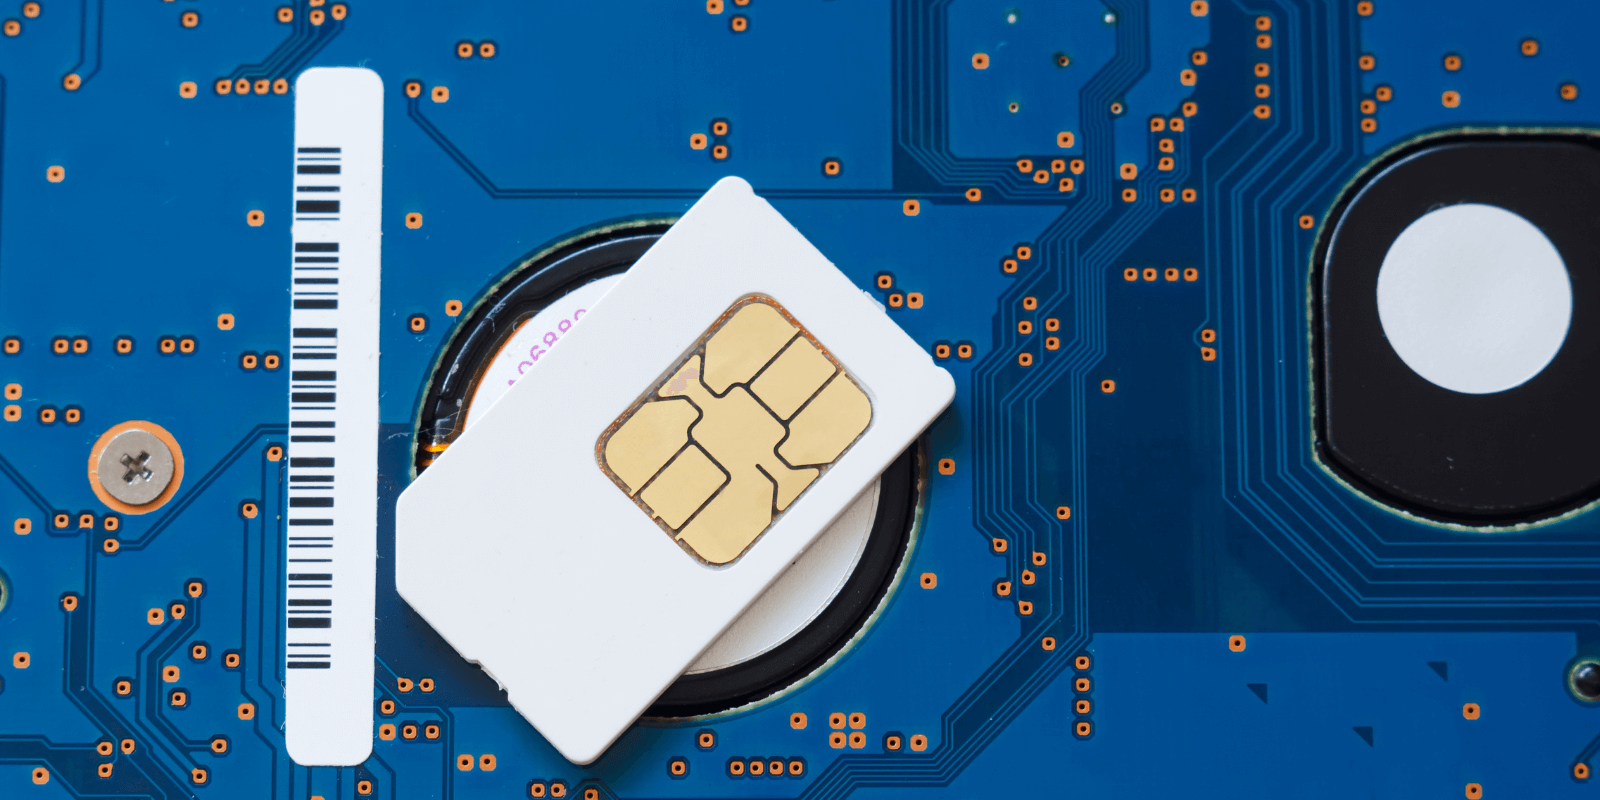 How do I activate my SIM card after a long time?